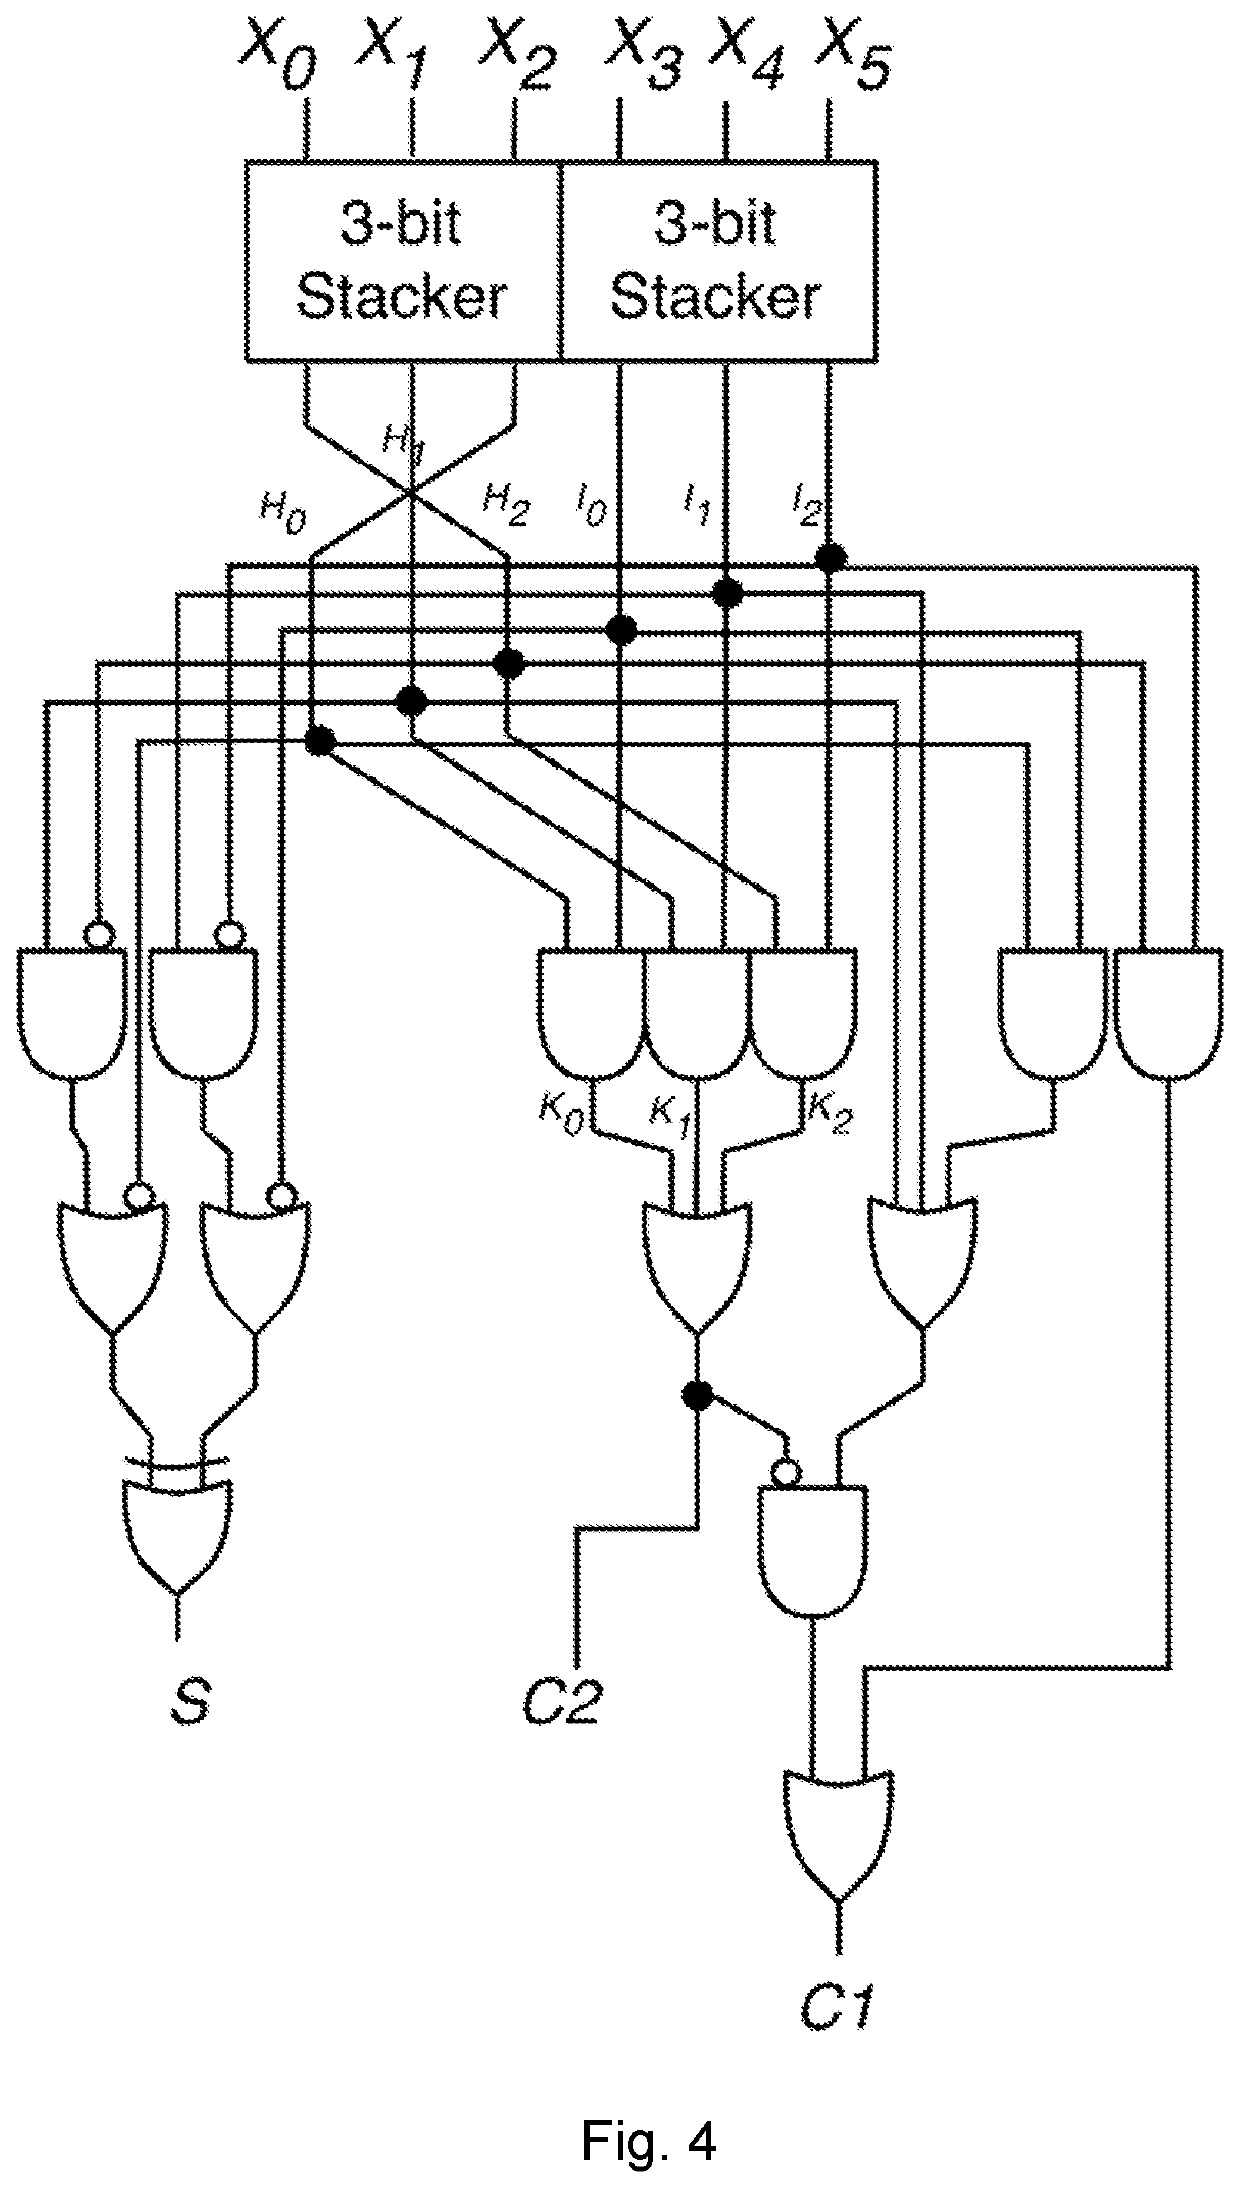 Fast binary counters based on symmetric stacking and methods for same